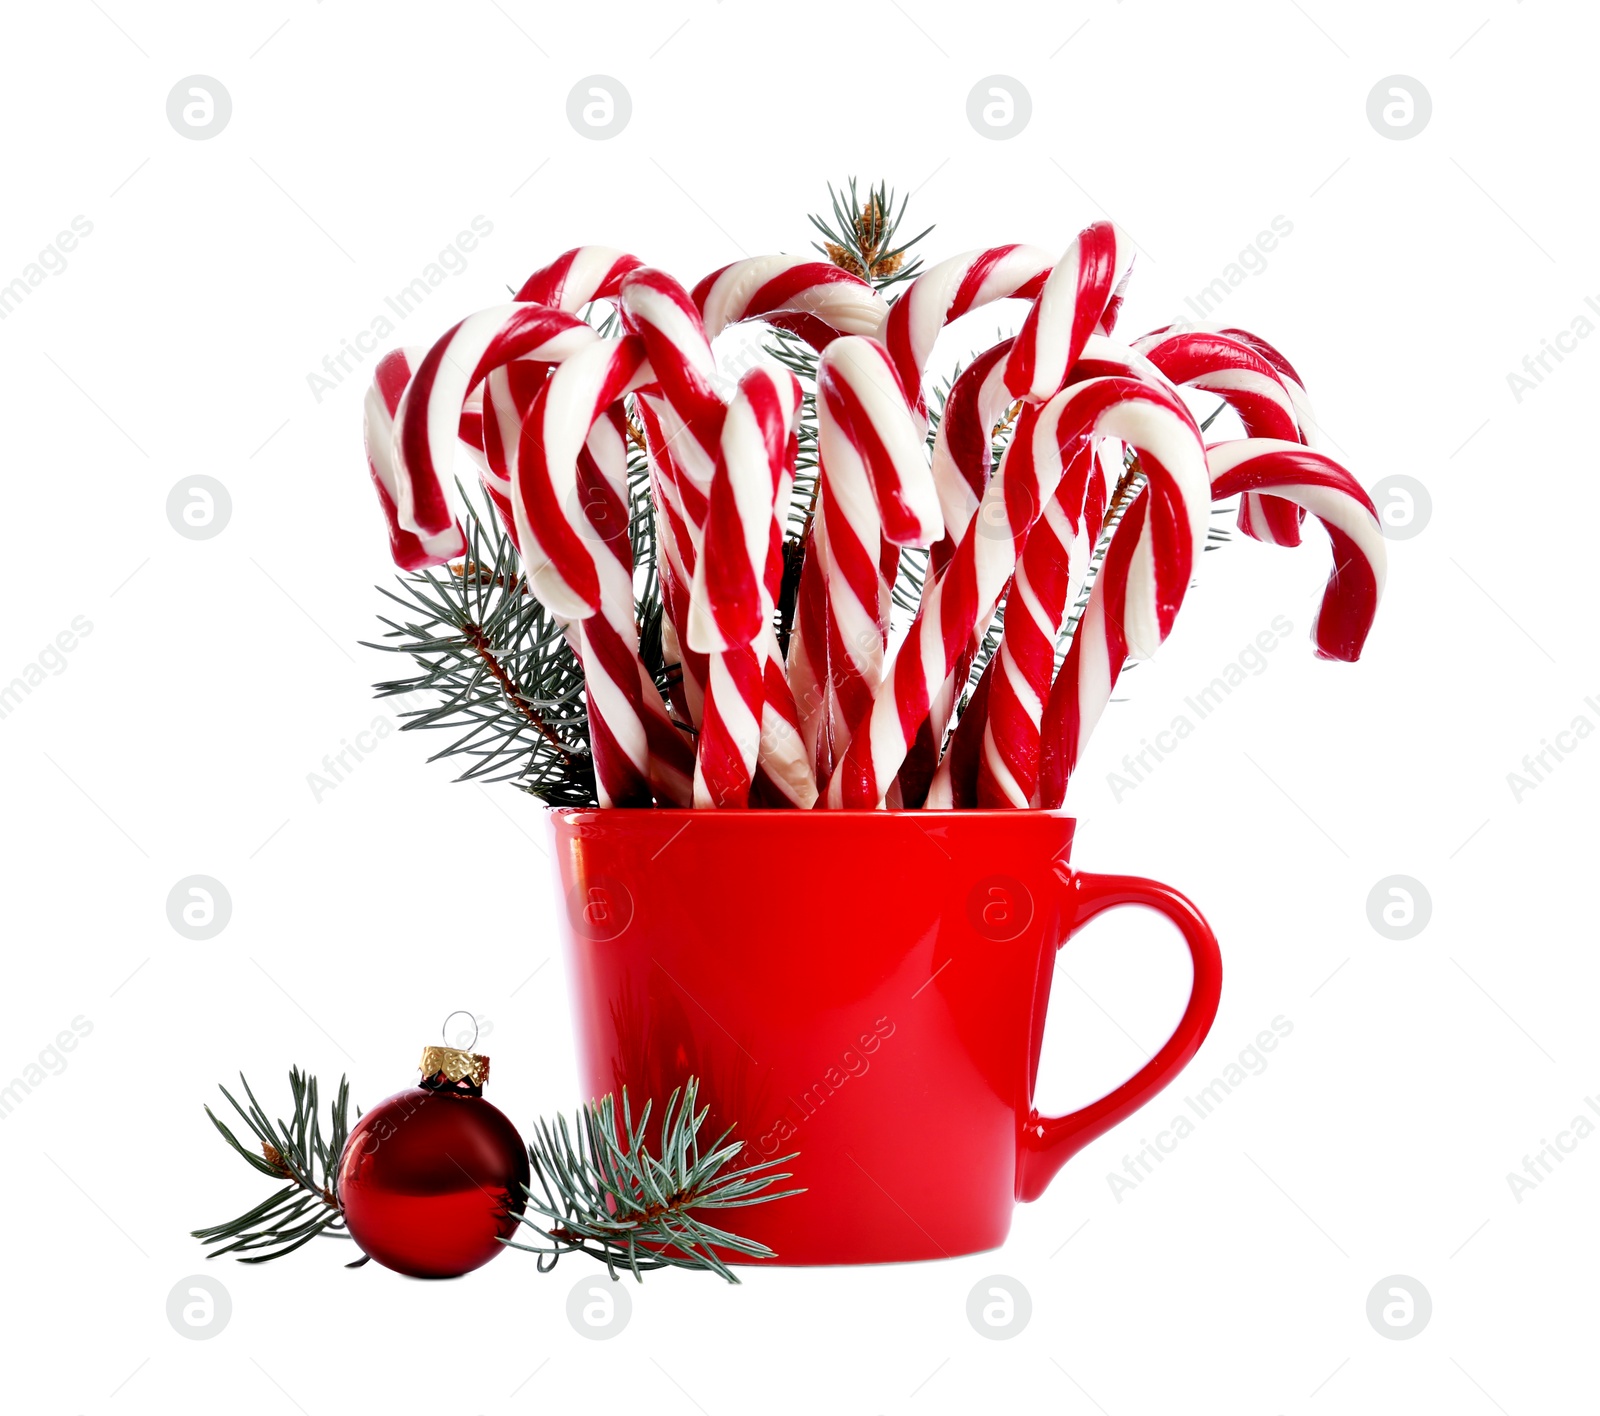 Image of Many sweet candy canes in red cup with fir tree branches near bauble on white background. Christmas treat